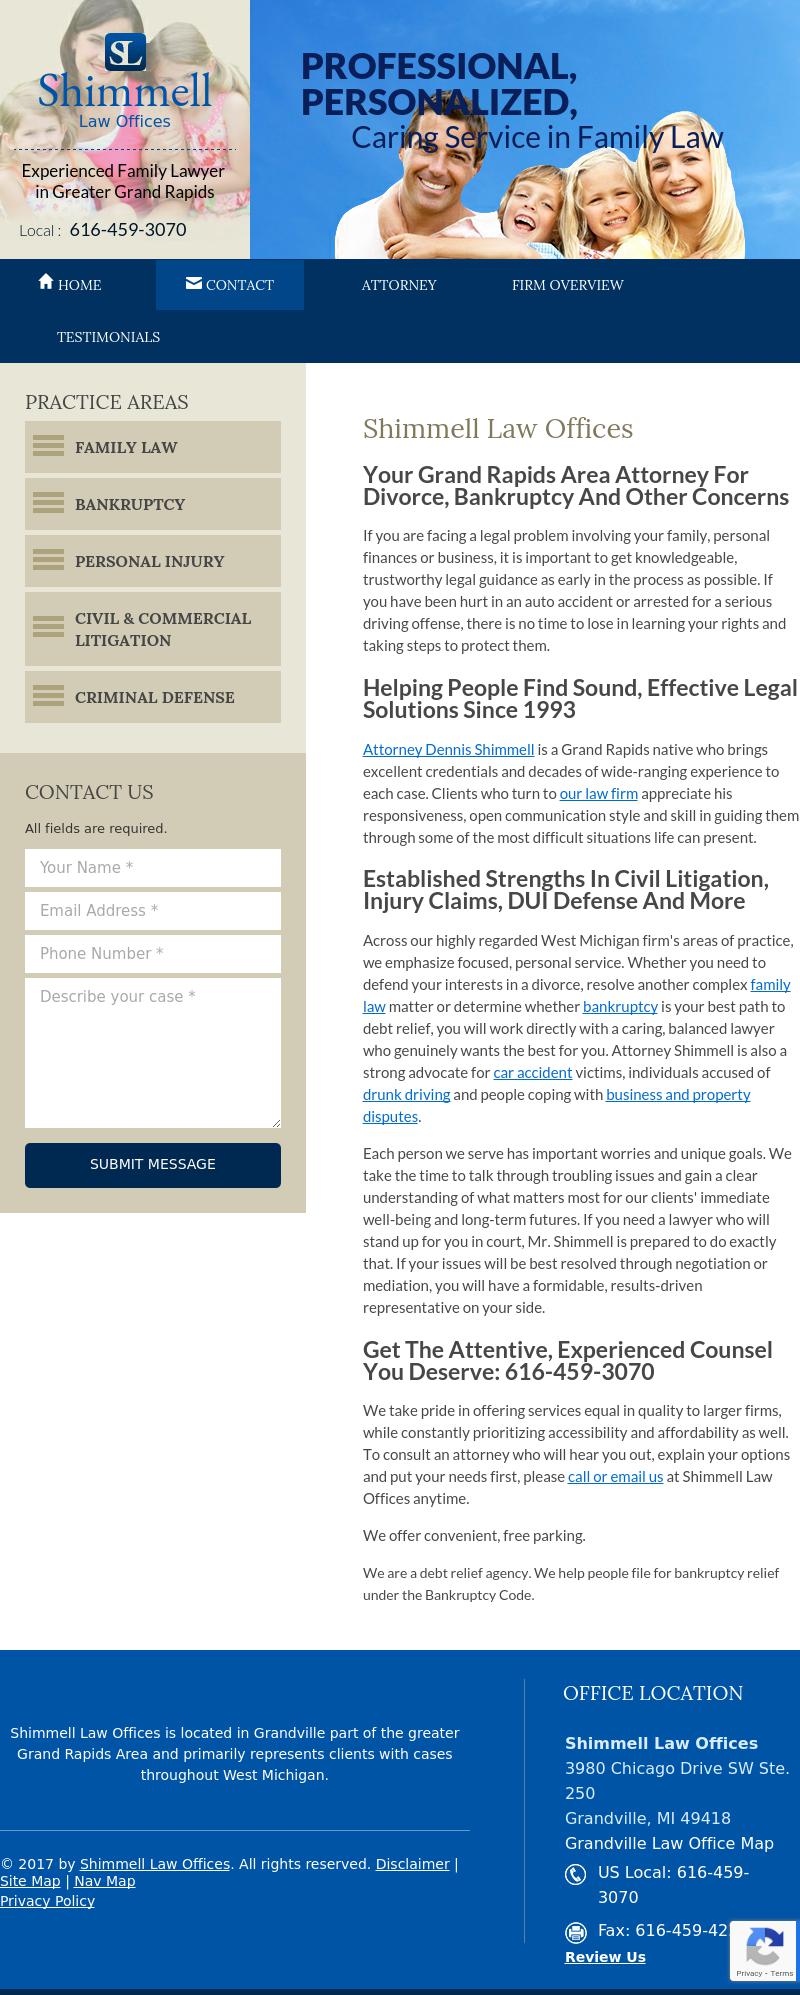 Shimmell Law Offices - Grandville MI Lawyers